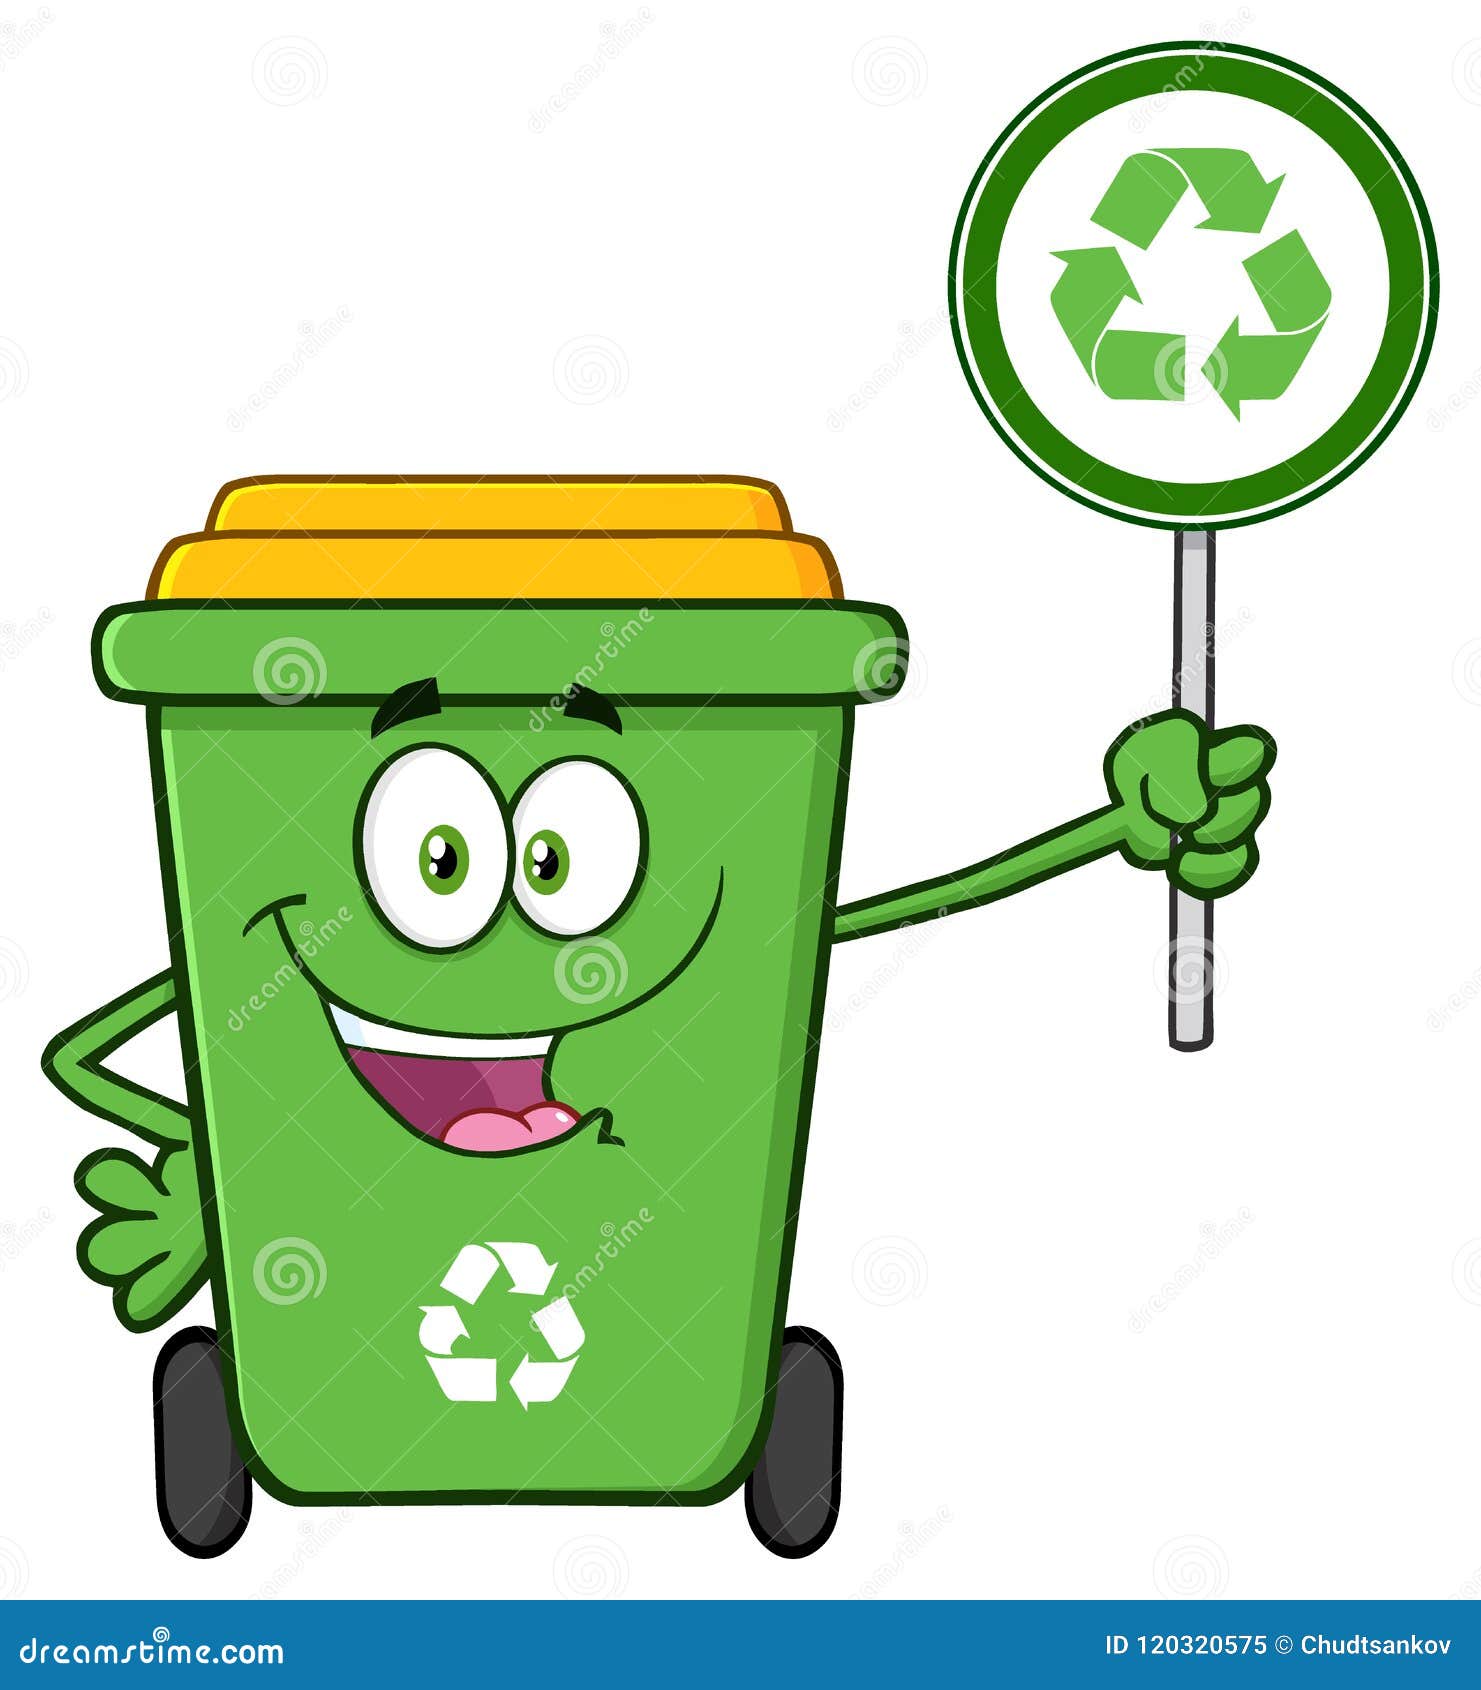 cute green recycle bin cartoon mascot character holding a recycle sign